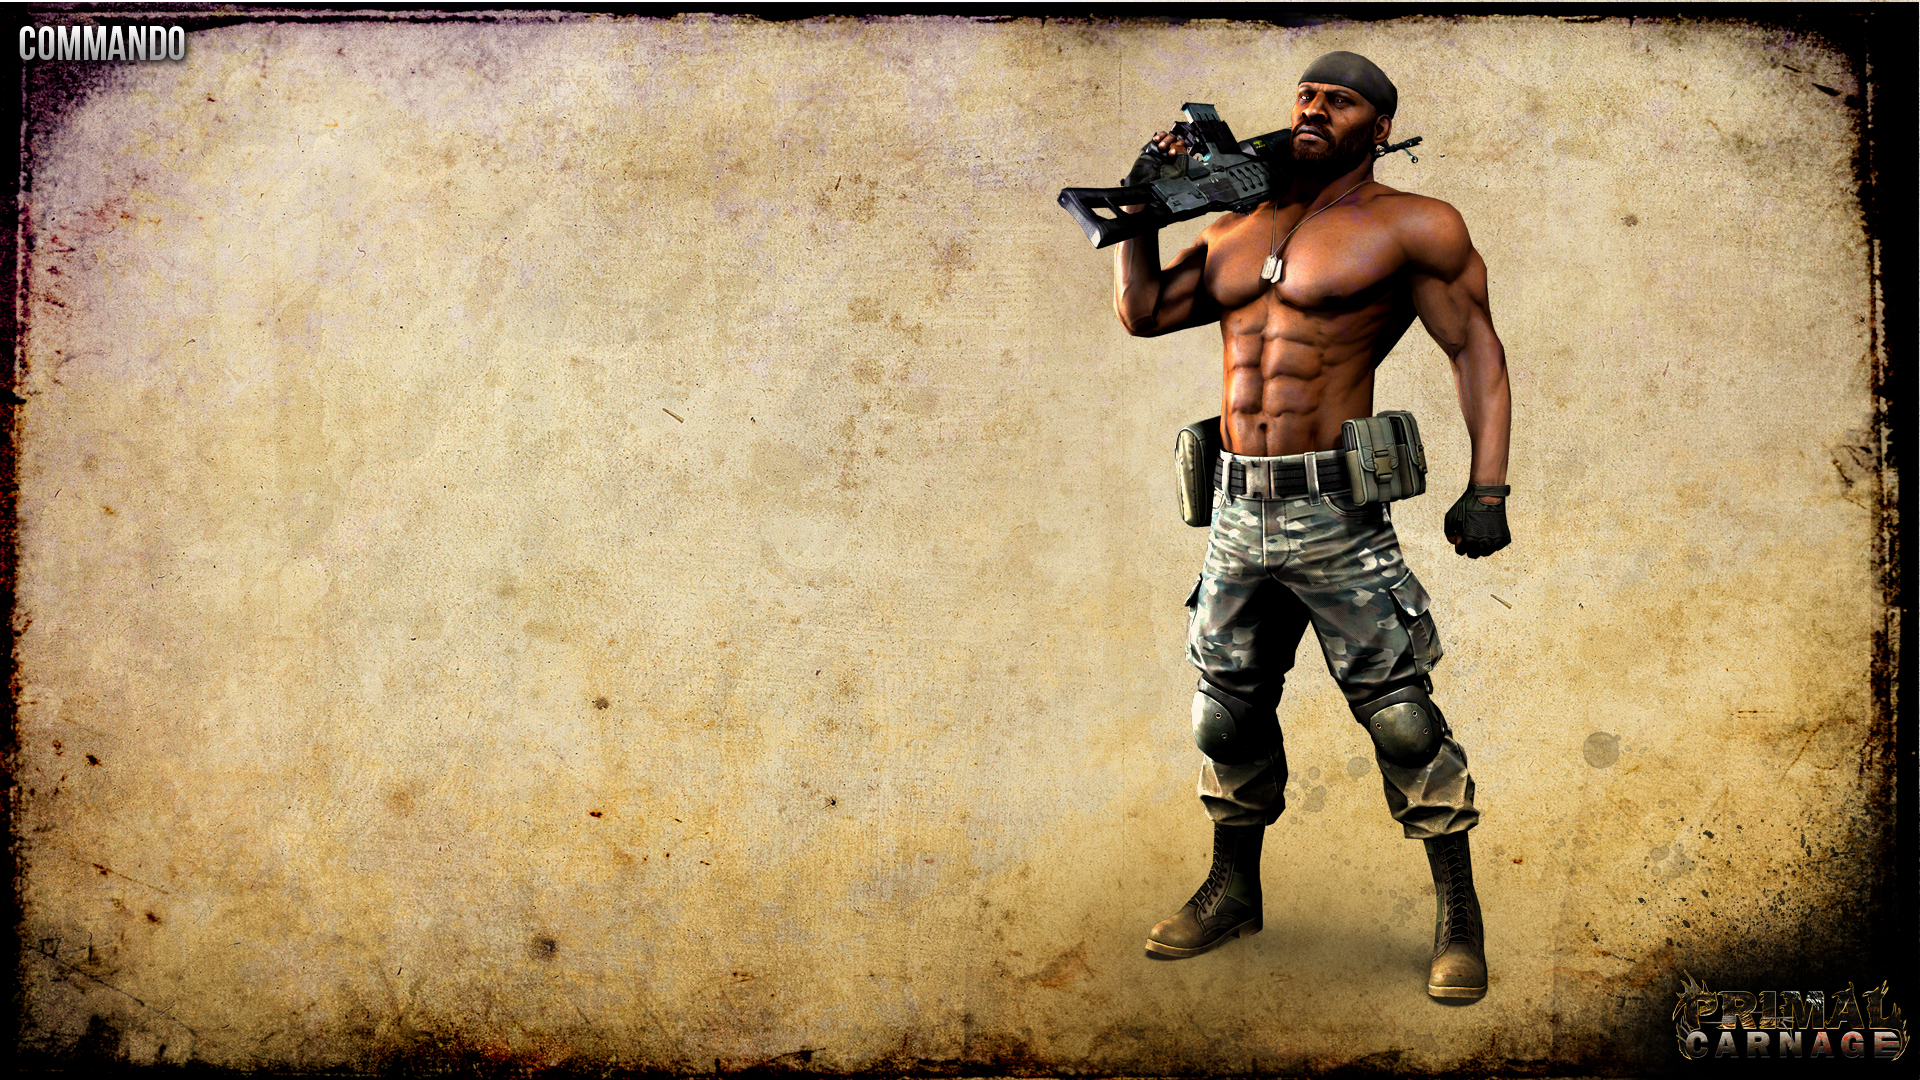 commando wallpaper,muscle,barechested,games